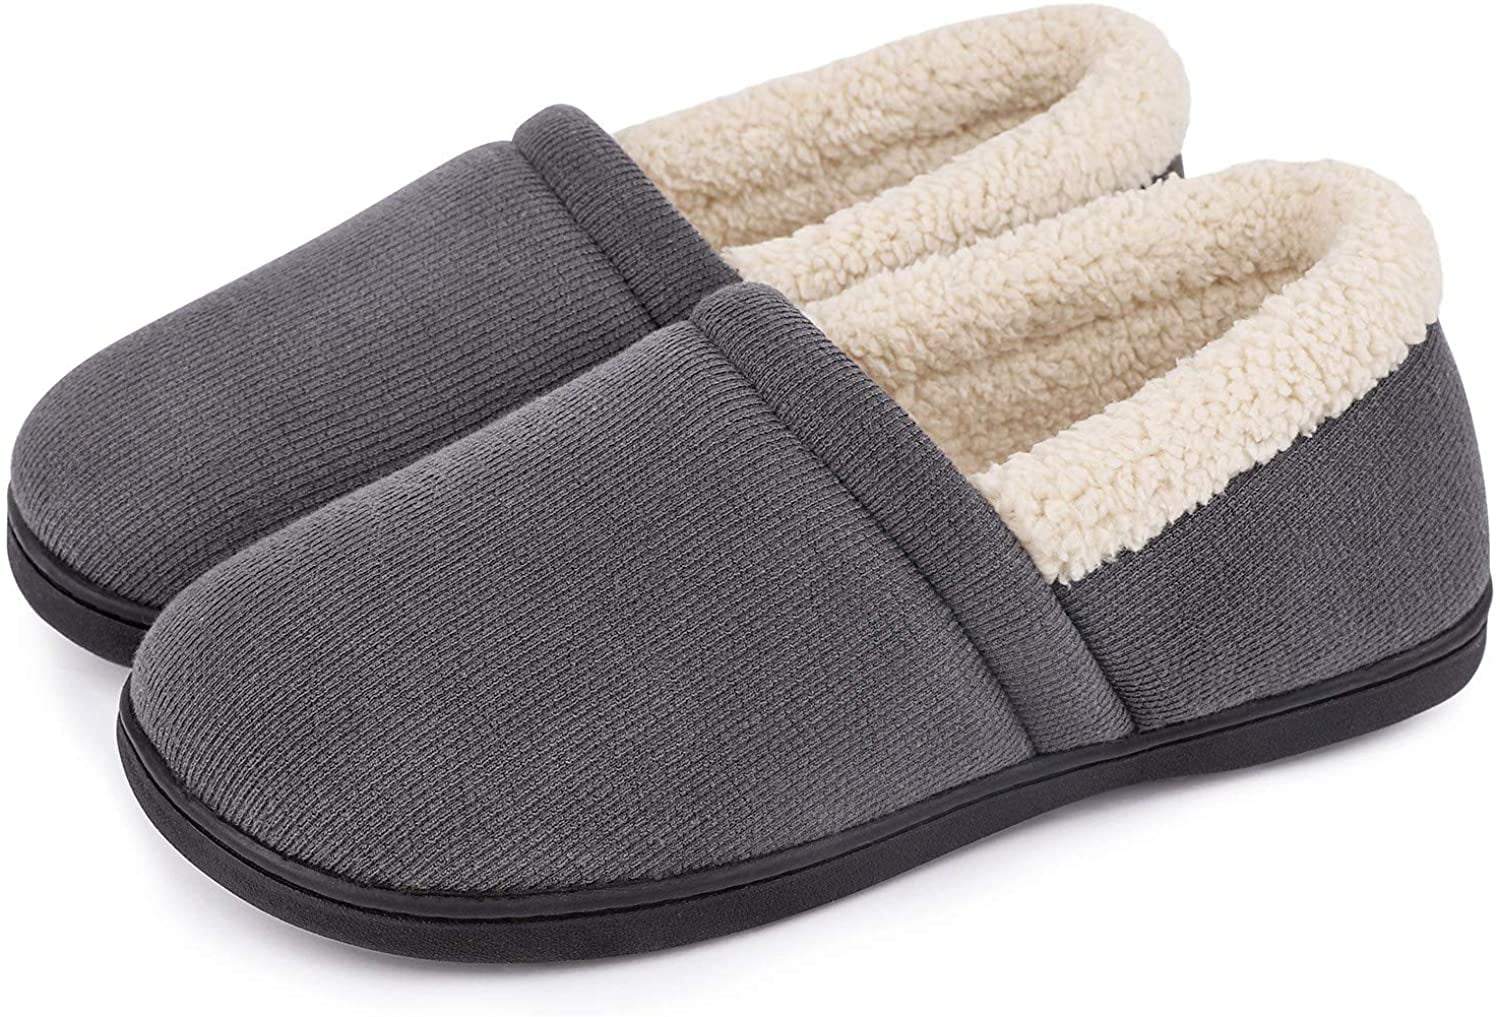 Men's Comfy Fuzzy Knit Cotton Memory Foam House Shoes Slippers w/Indoor ...